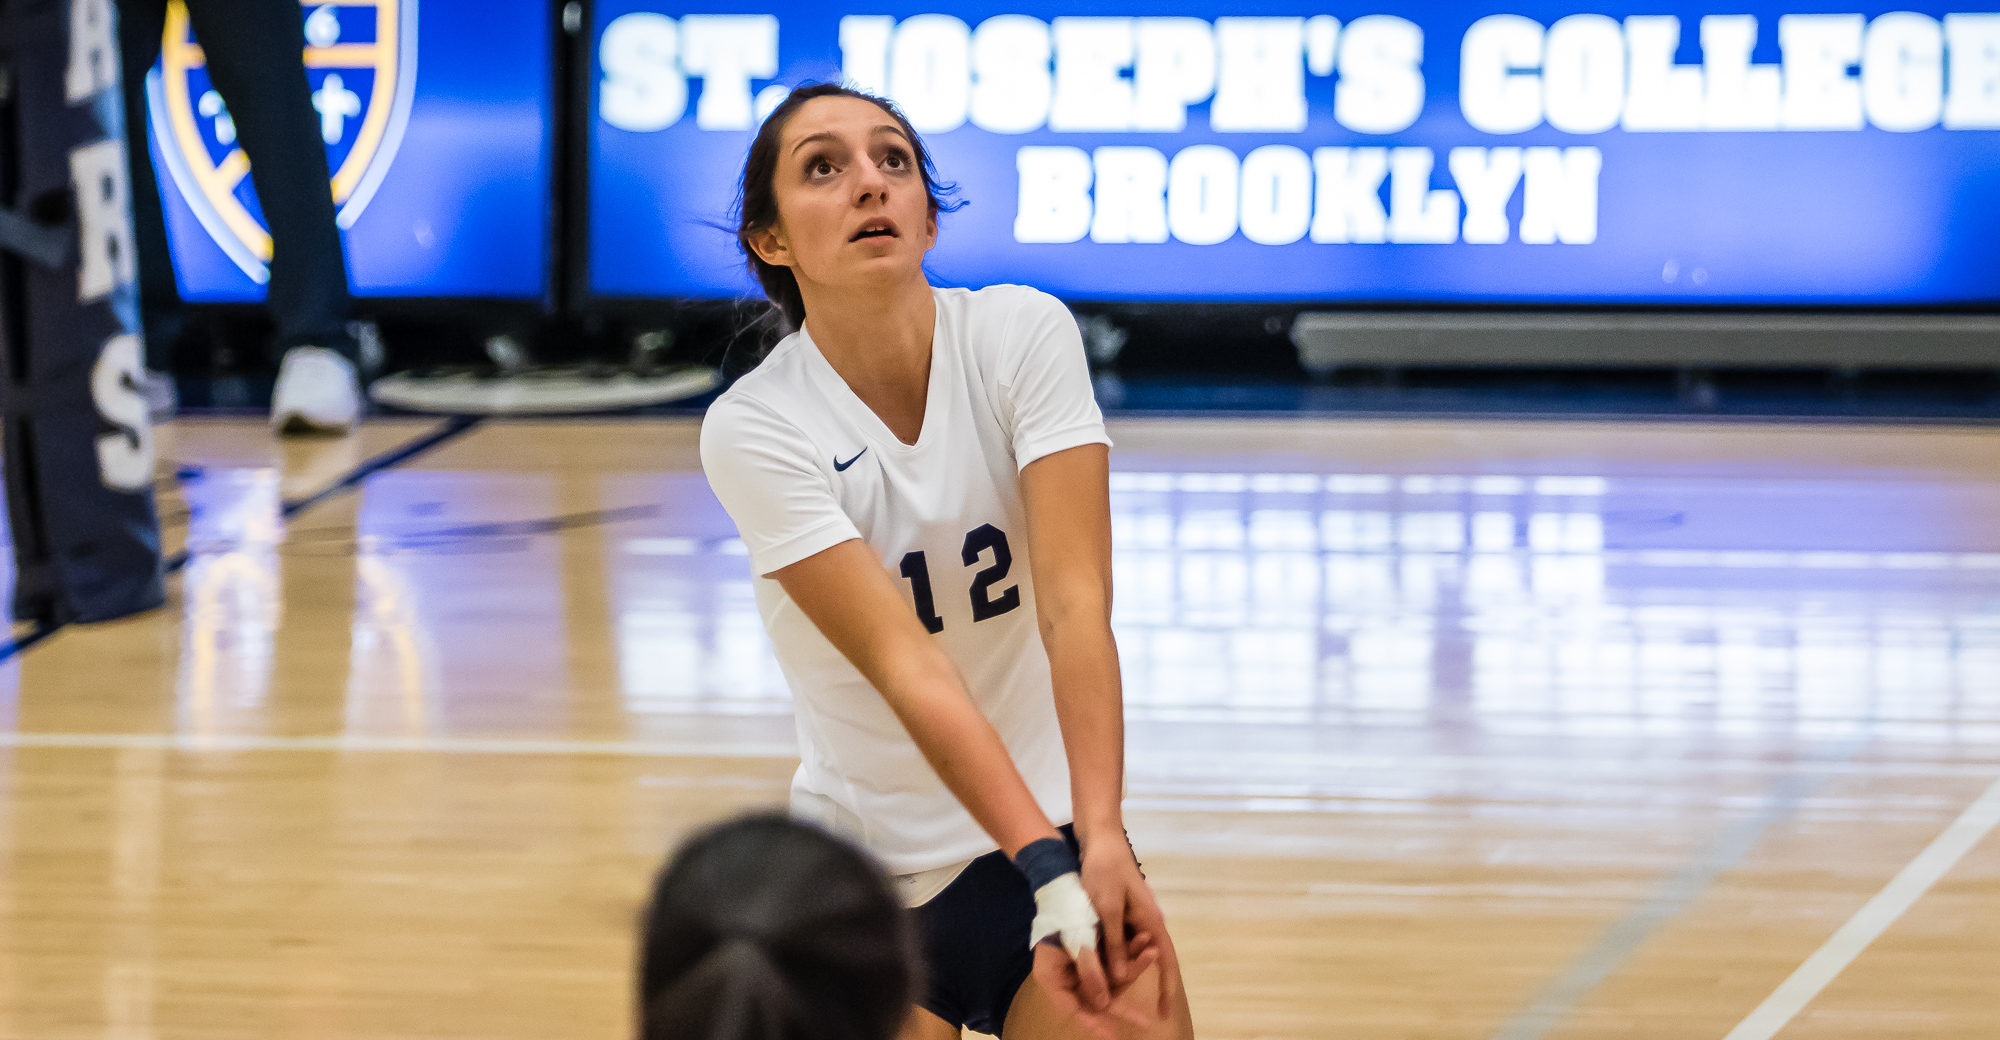 DiCioccio’s 19 Points Vault Women’s Volleyball Over Purchase to Split Tri-Match